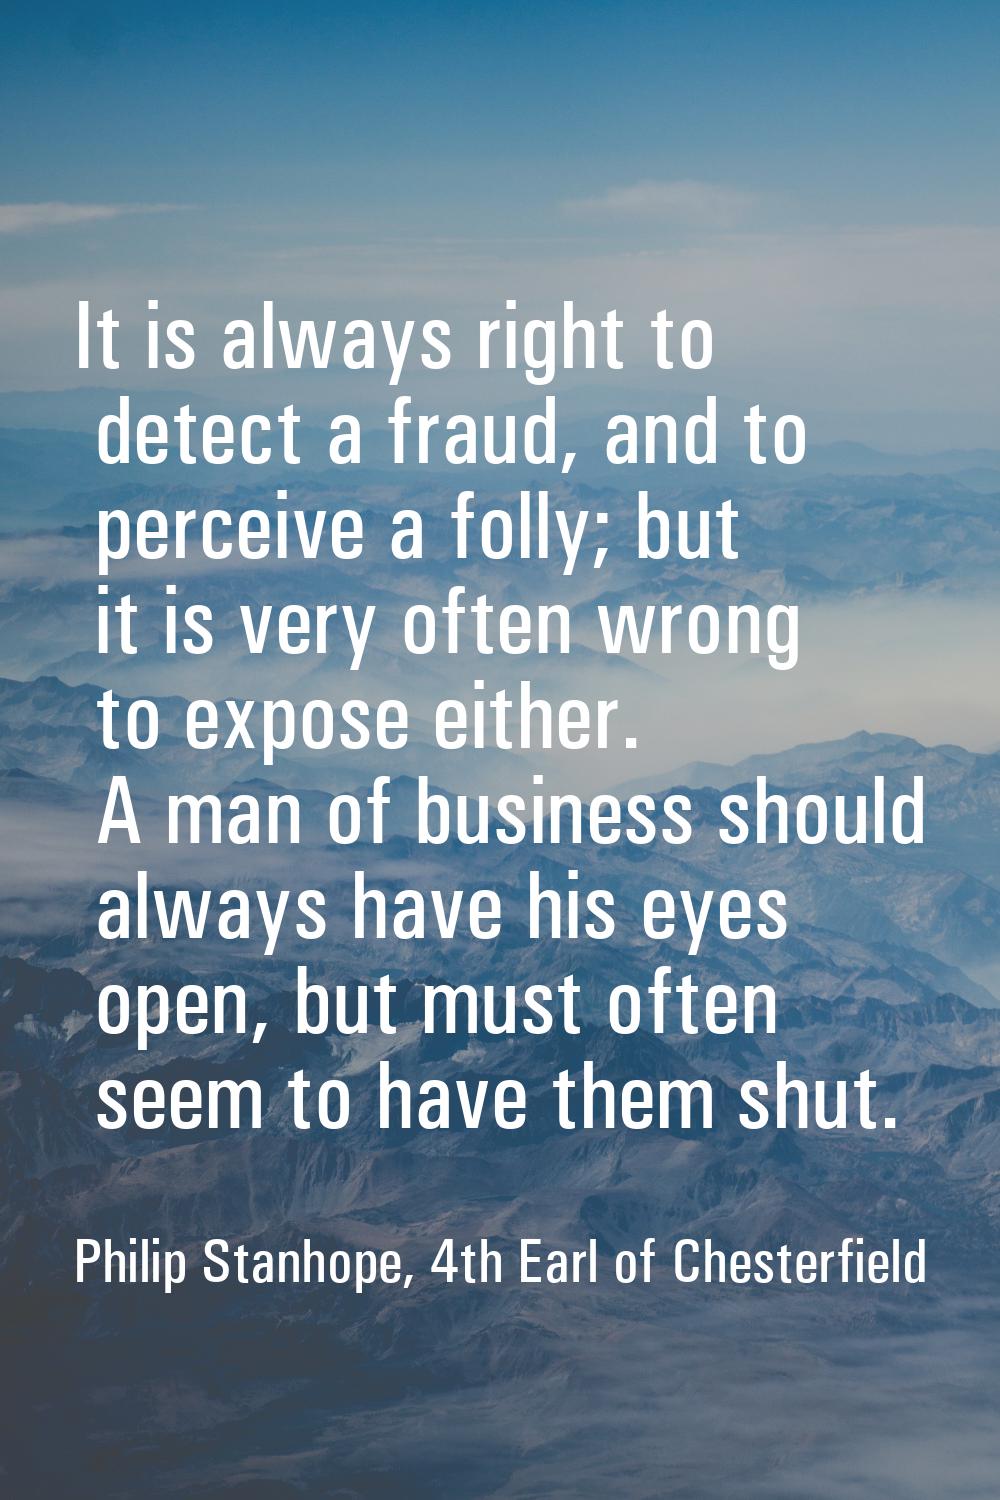 It is always right to detect a fraud, and to perceive a folly; but it is very often wrong to expose